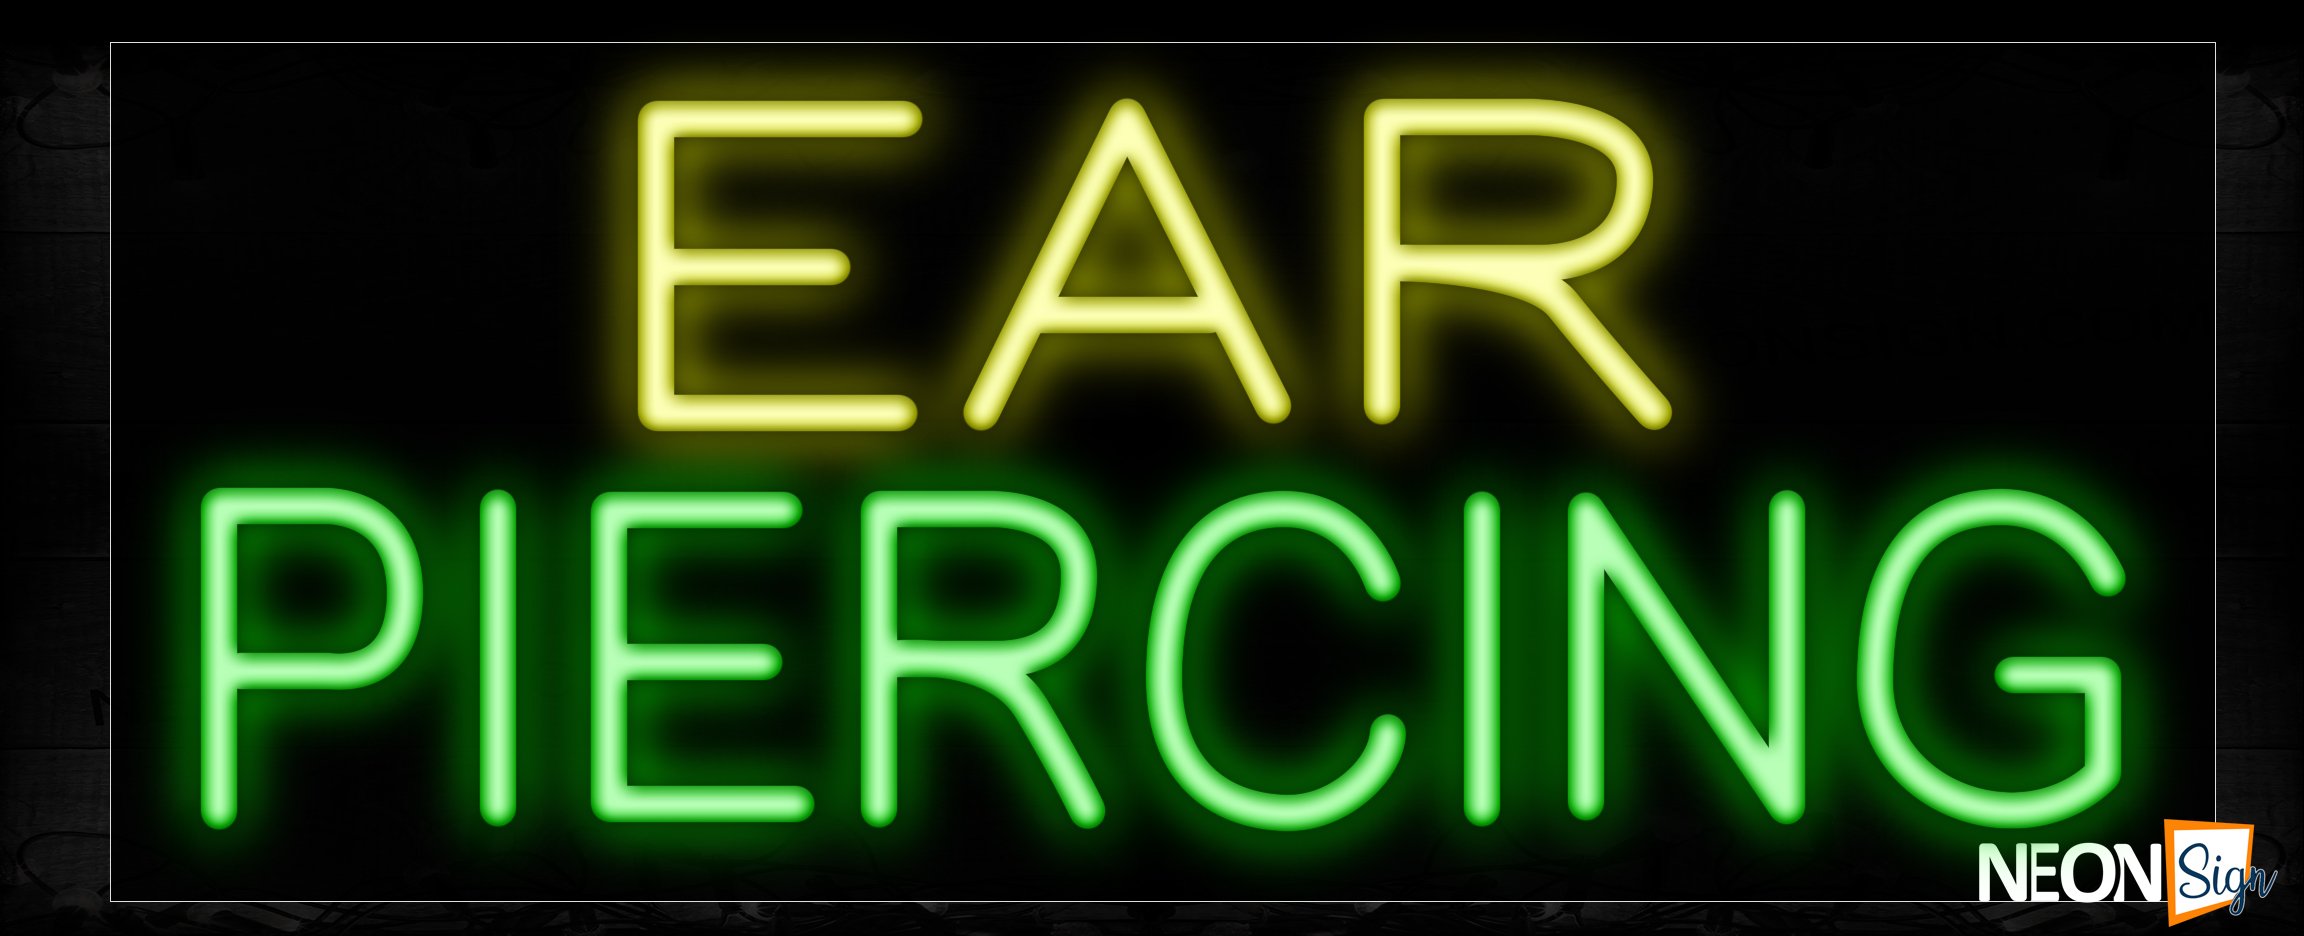 Image of Ear Piercing in yellow and green Neon Sign